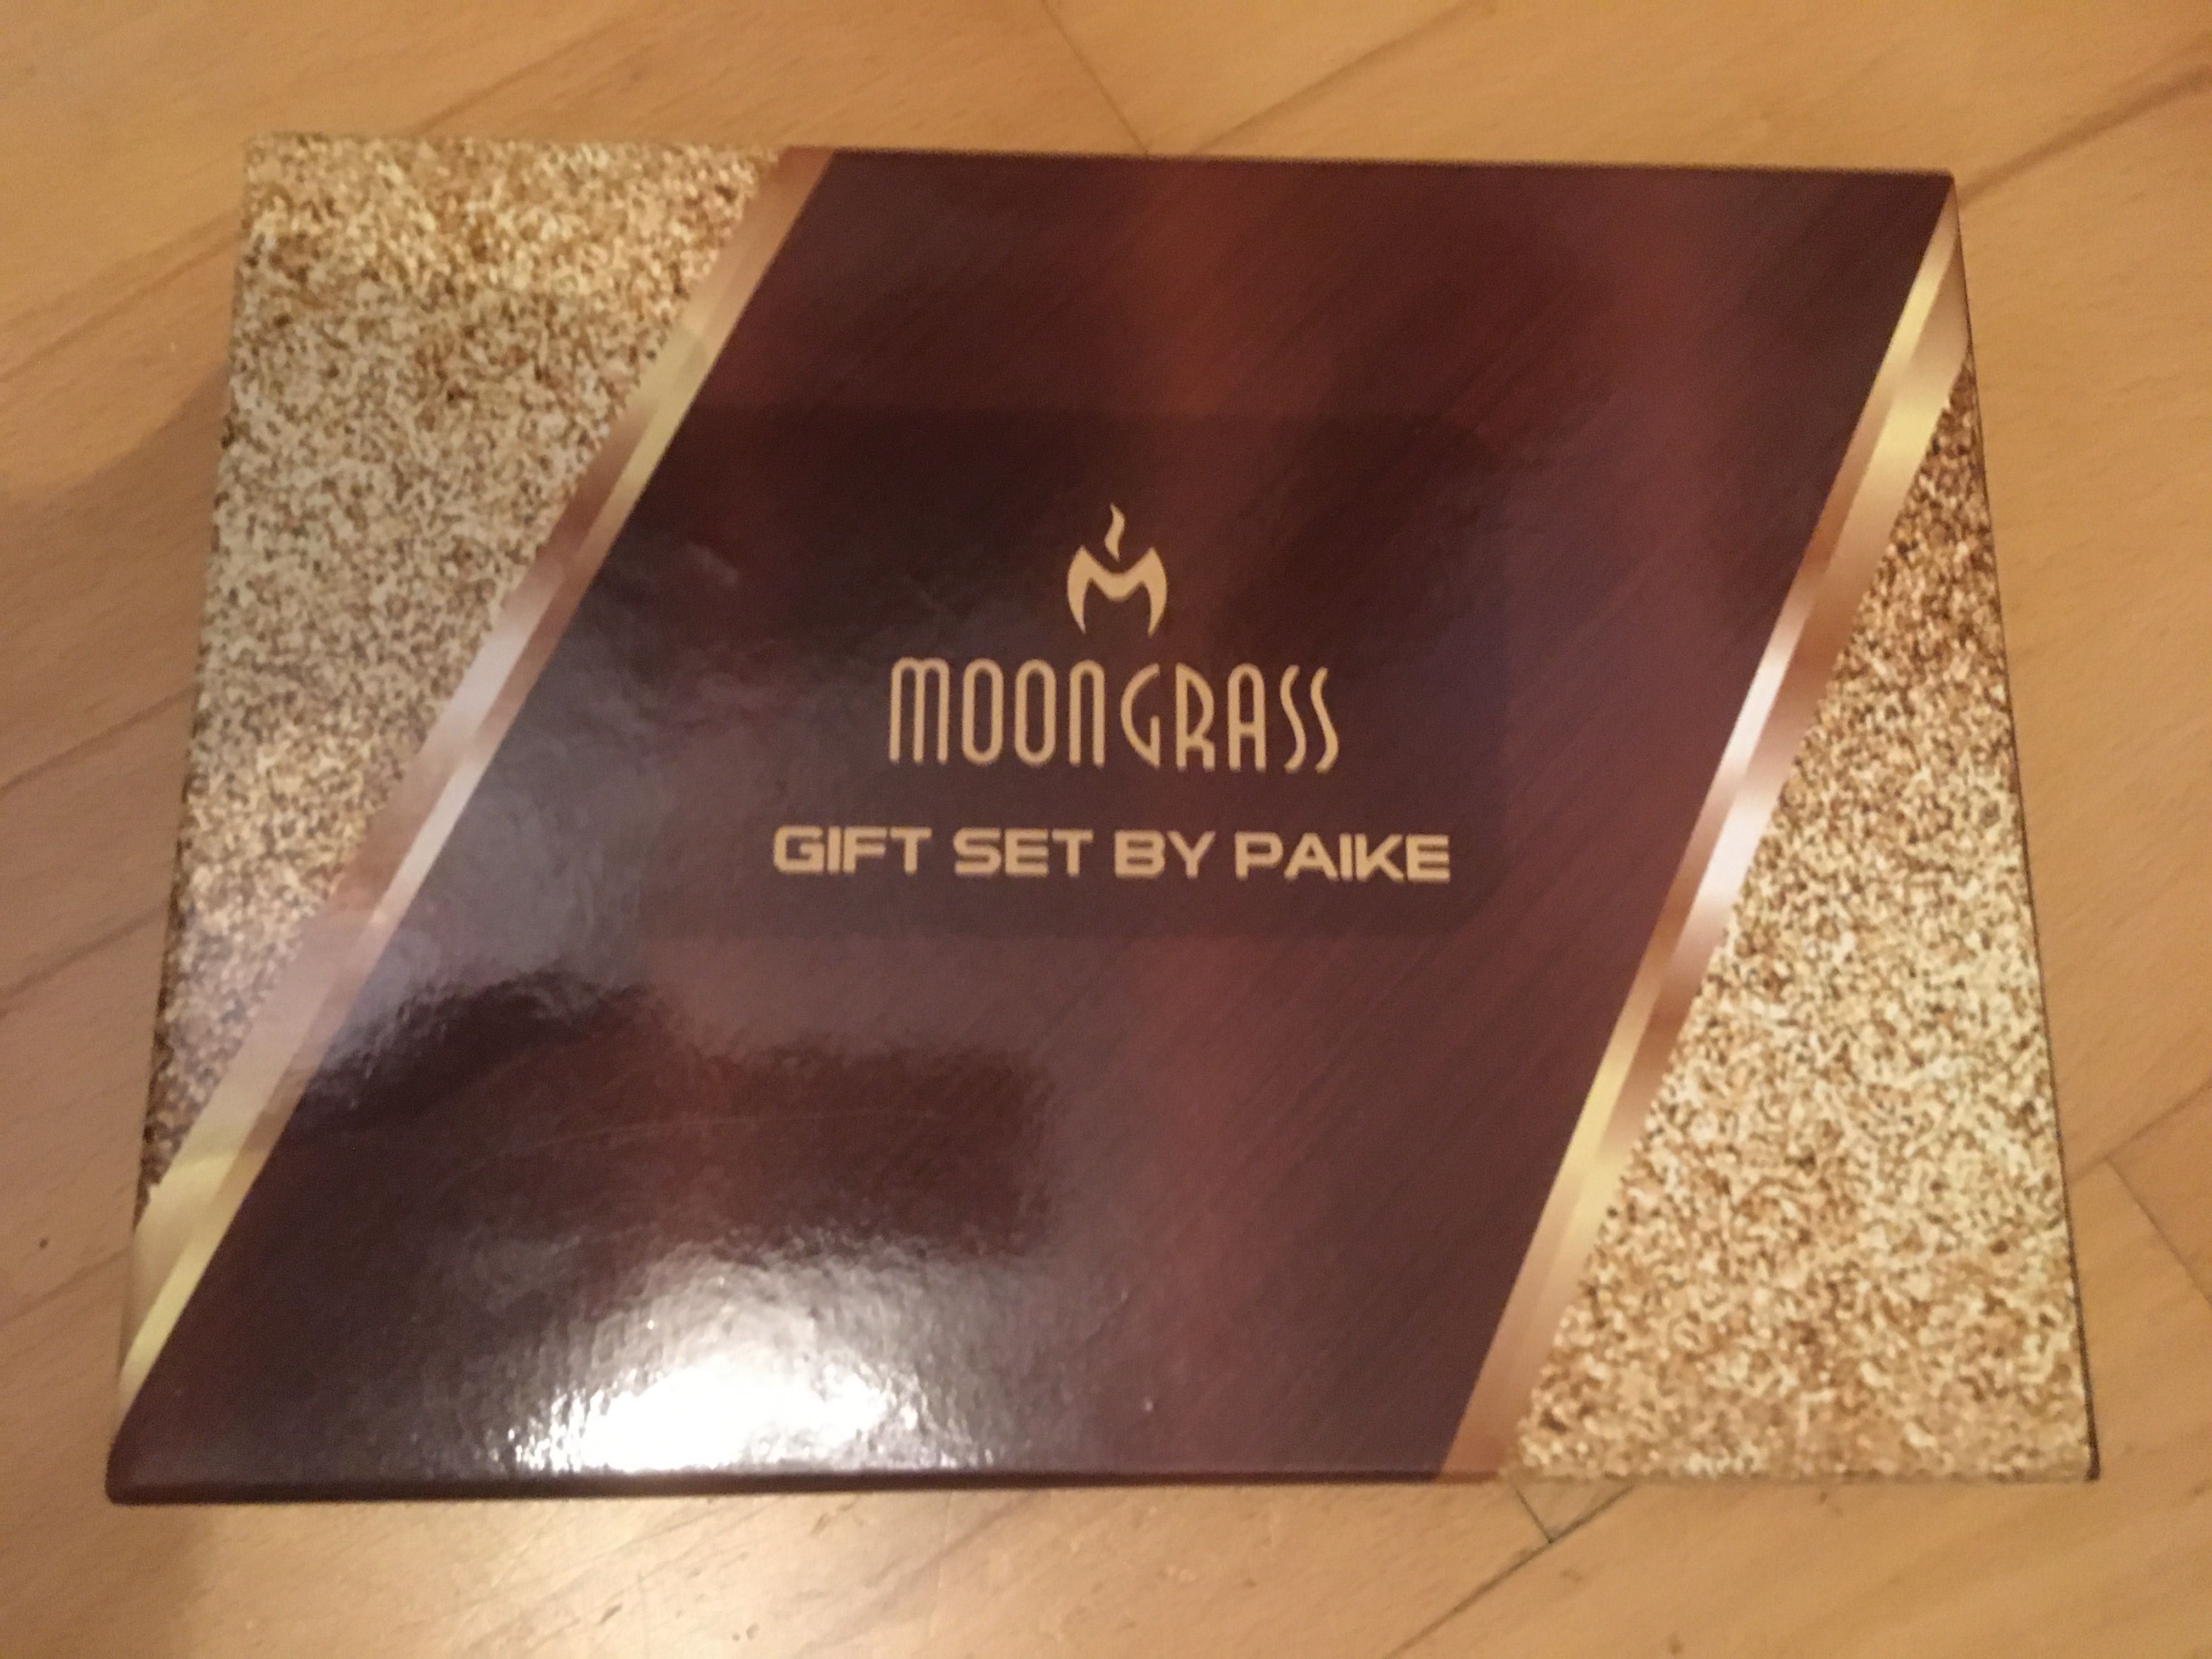 Moongrass - Gift set by paike